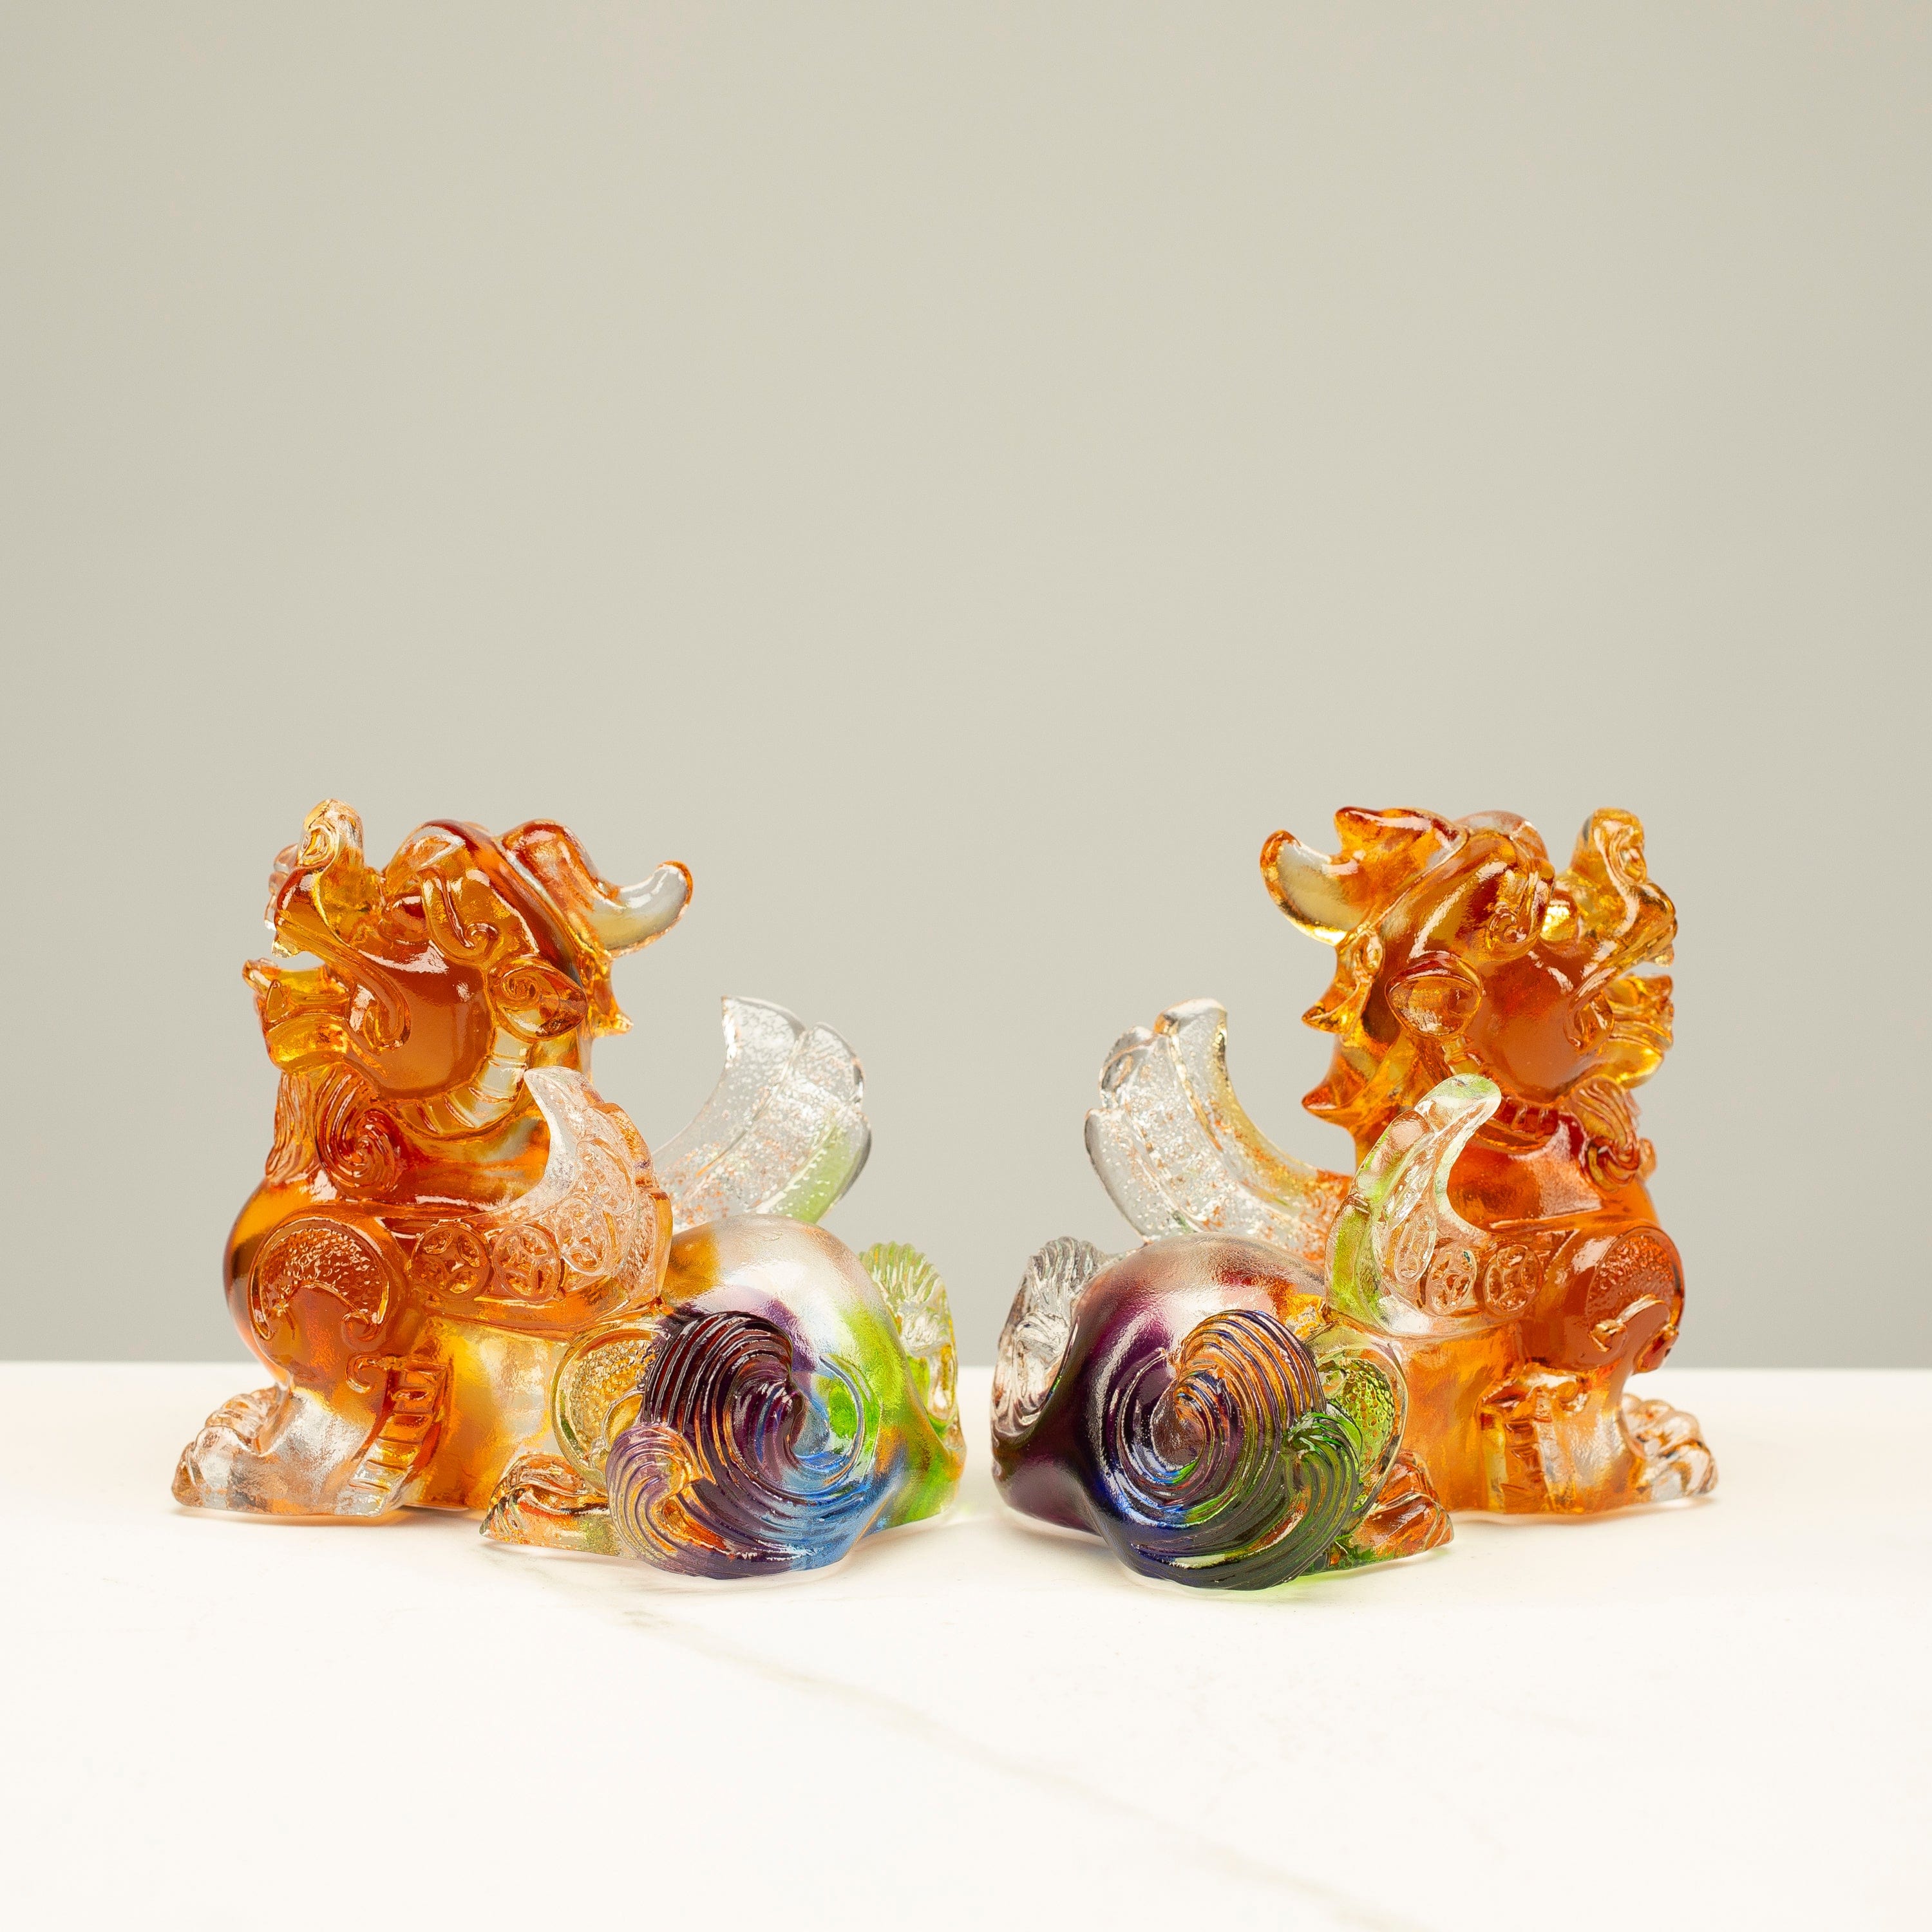 Kalifano Crystal Carving Protective Foo Dog Crystal Carving Pair - A Symbol of Good Luck and Protection CR280-PIS